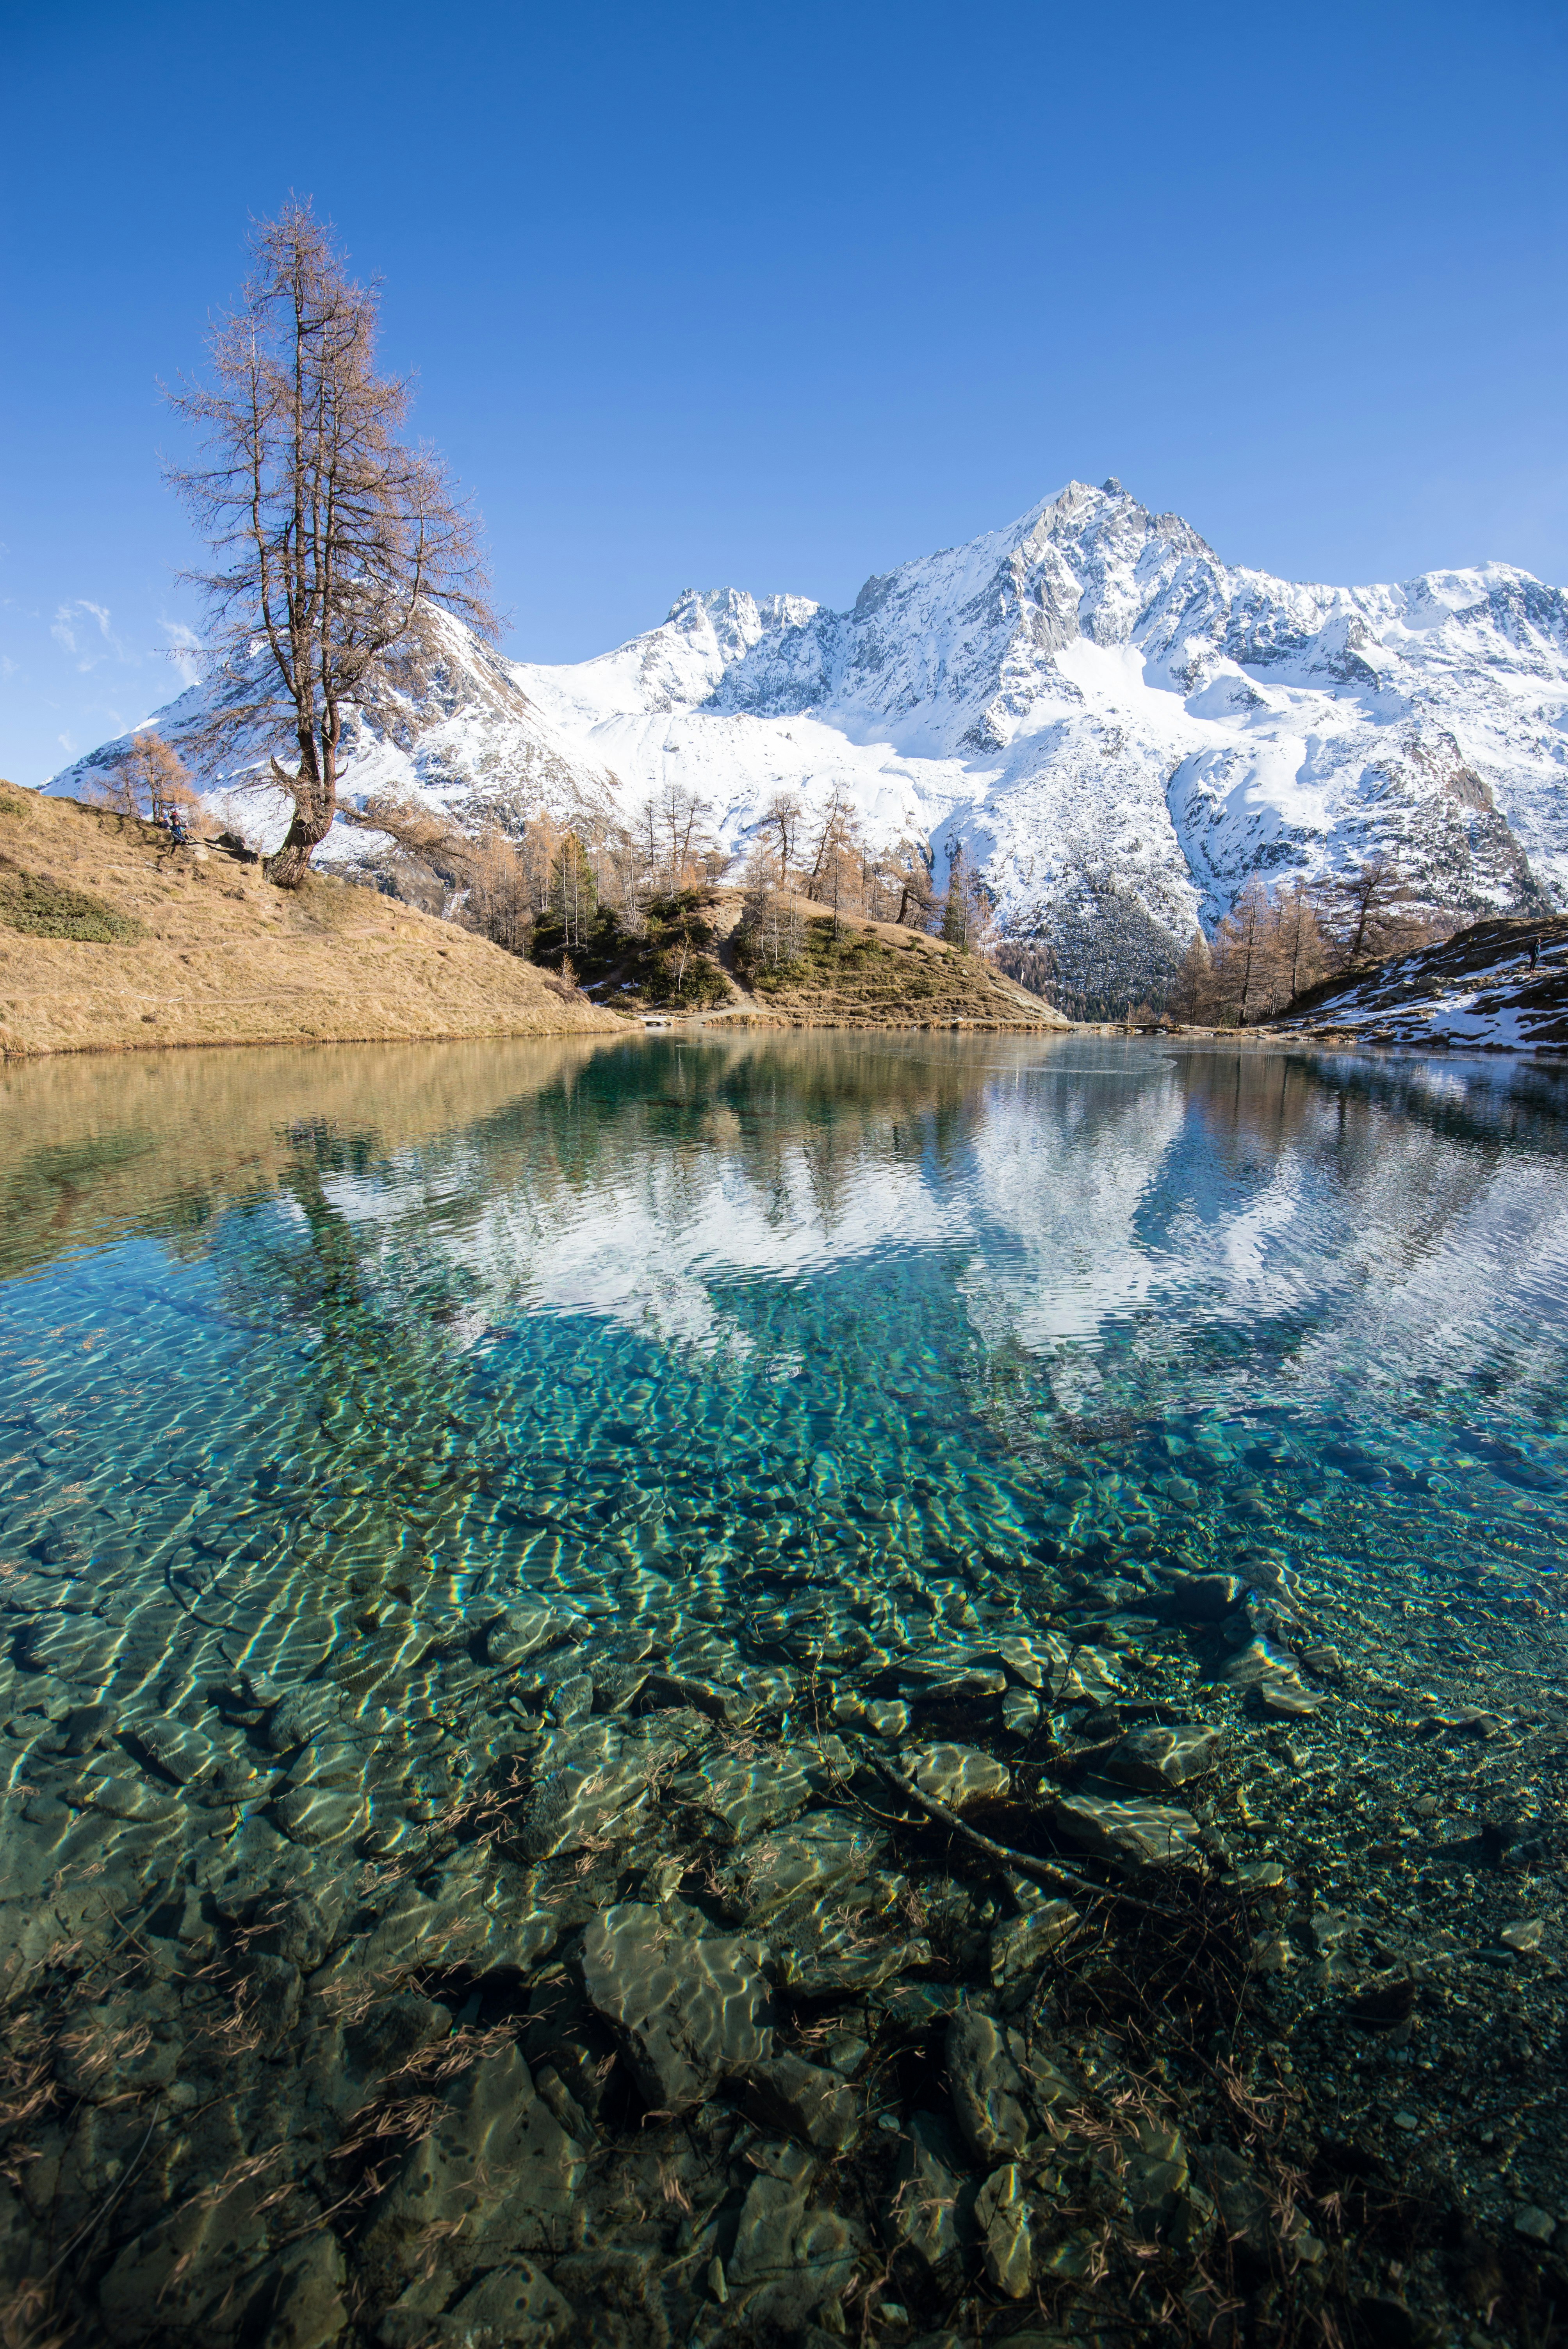 The cristalline water of the Lac Bleu, next to Arolla in the Swiss alps.